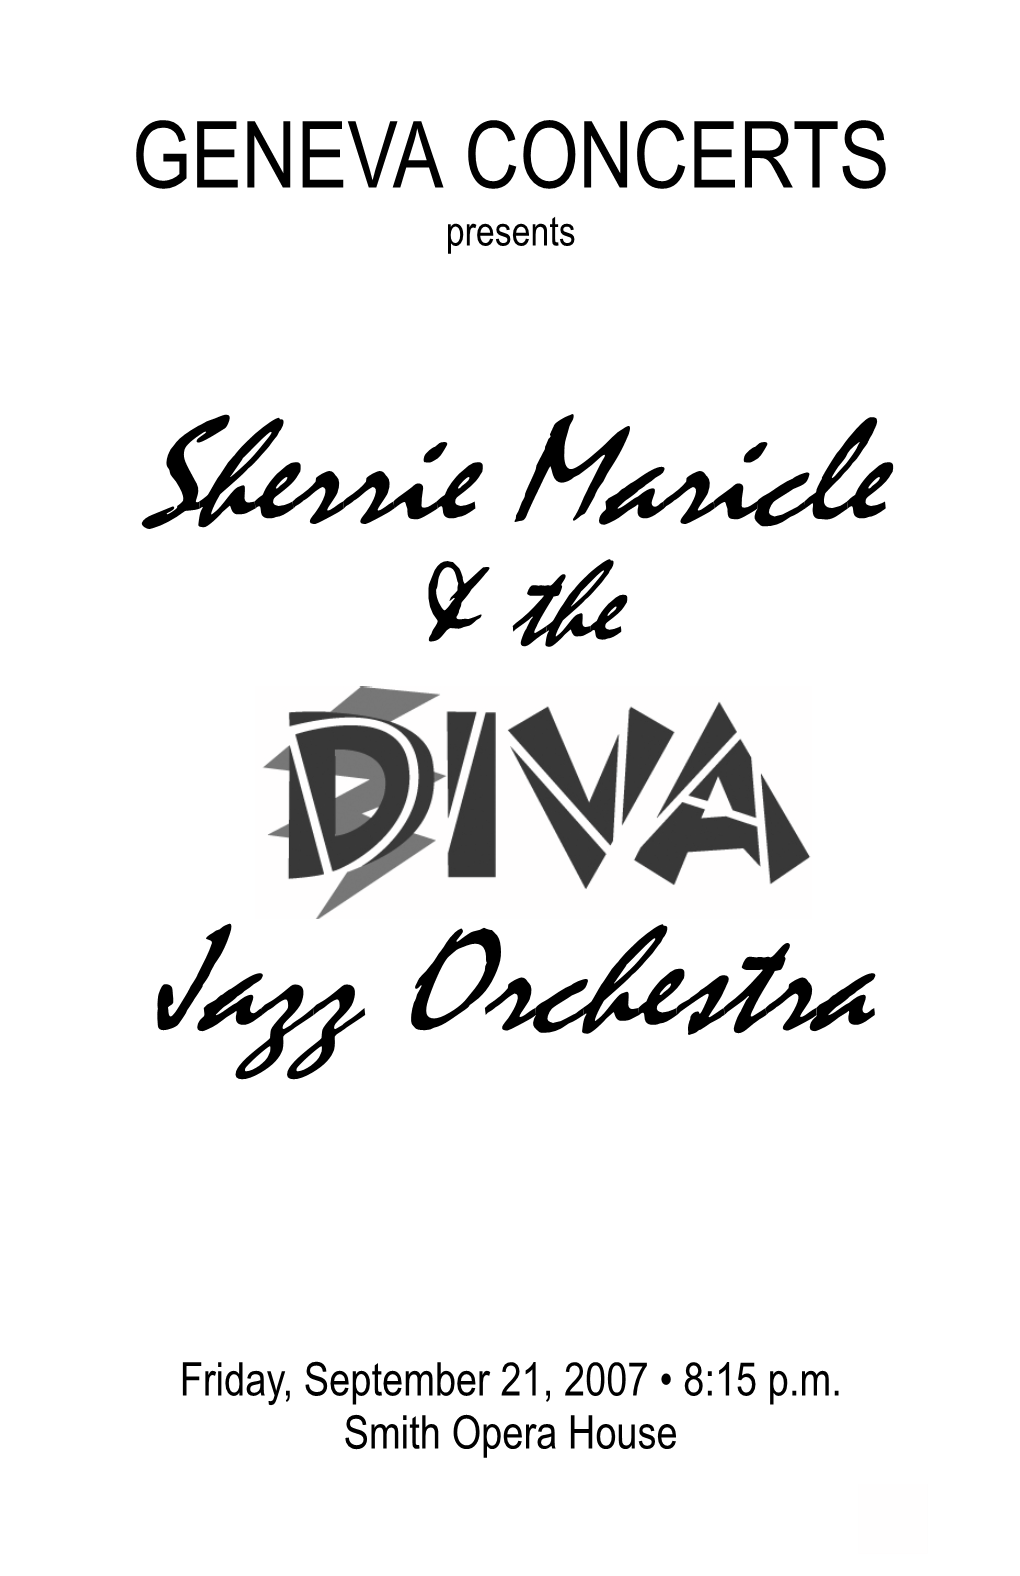 Sherrie Maricle & the DIVA Jazz Orchestra